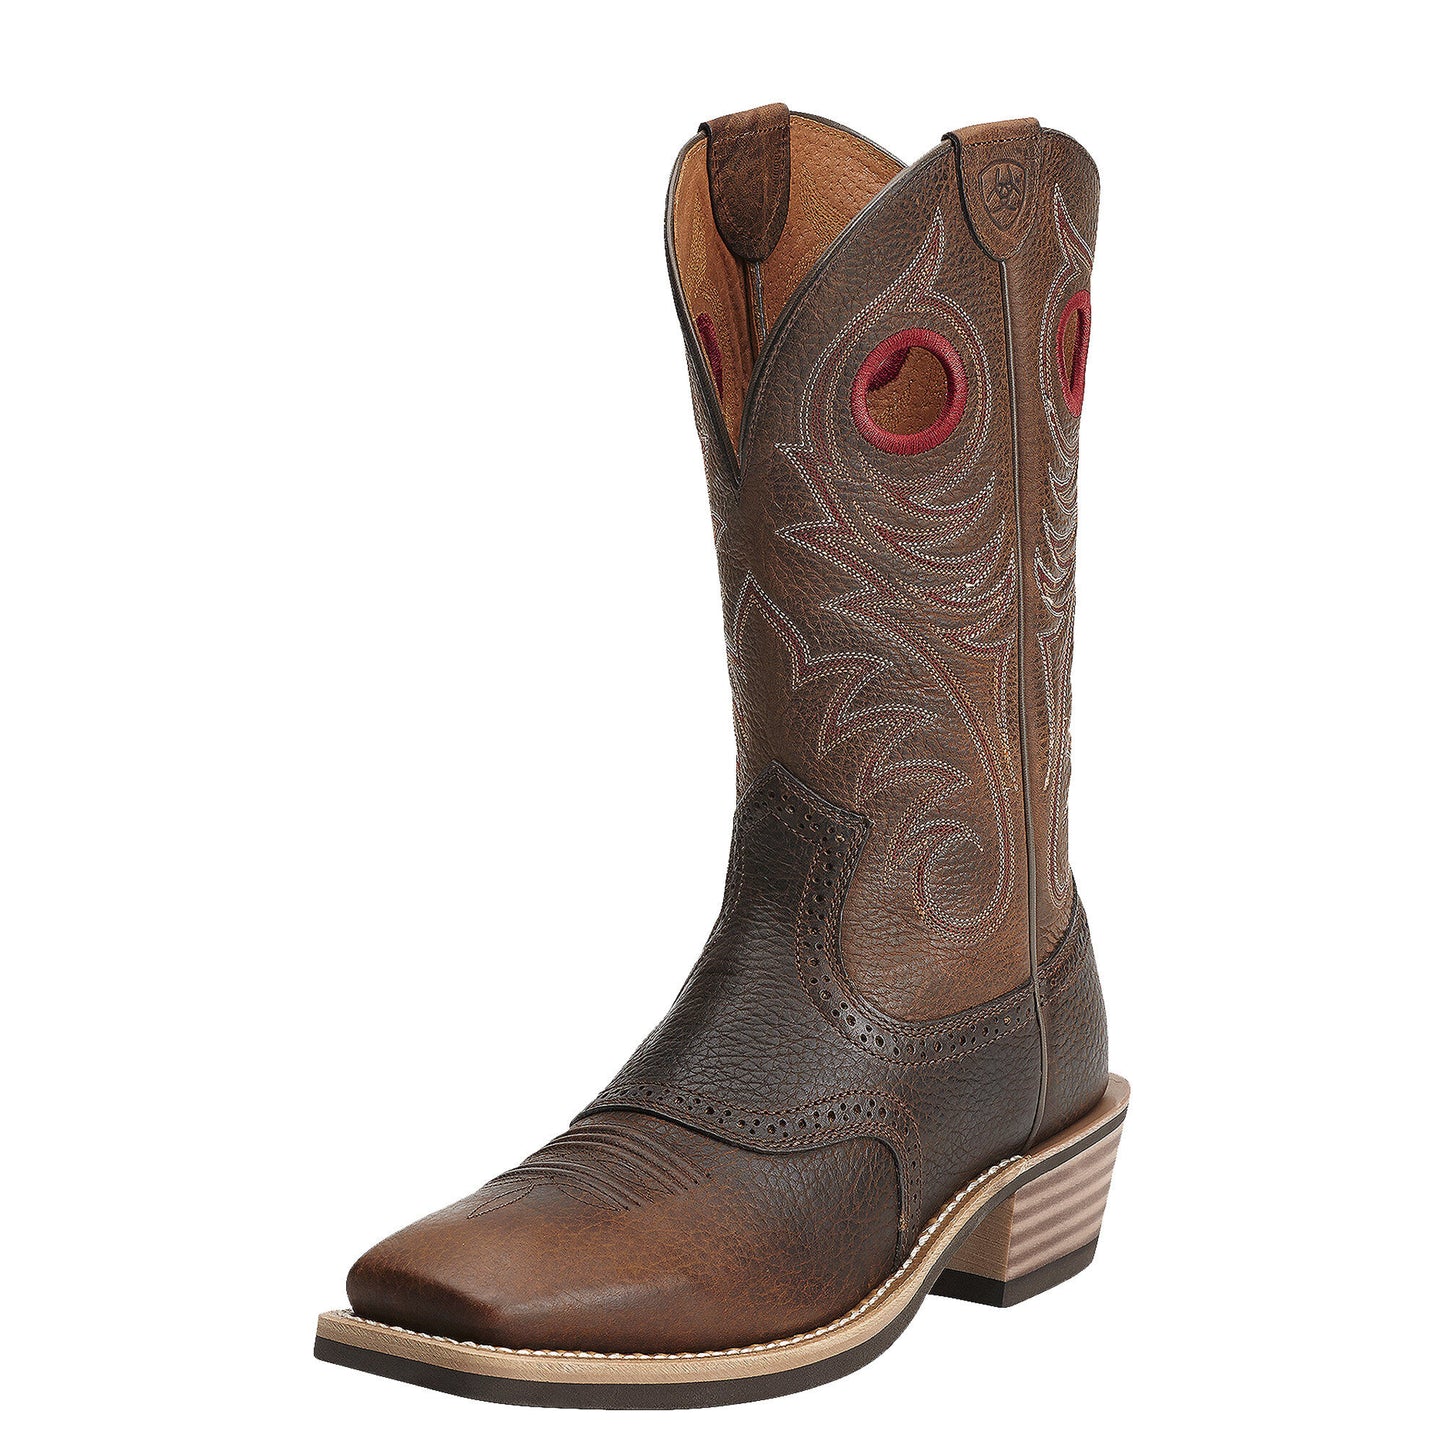 Ariat Men's Heritage Roughstock Wide Square Toe Boot - Brown Oiled Rowdy - French's Boots